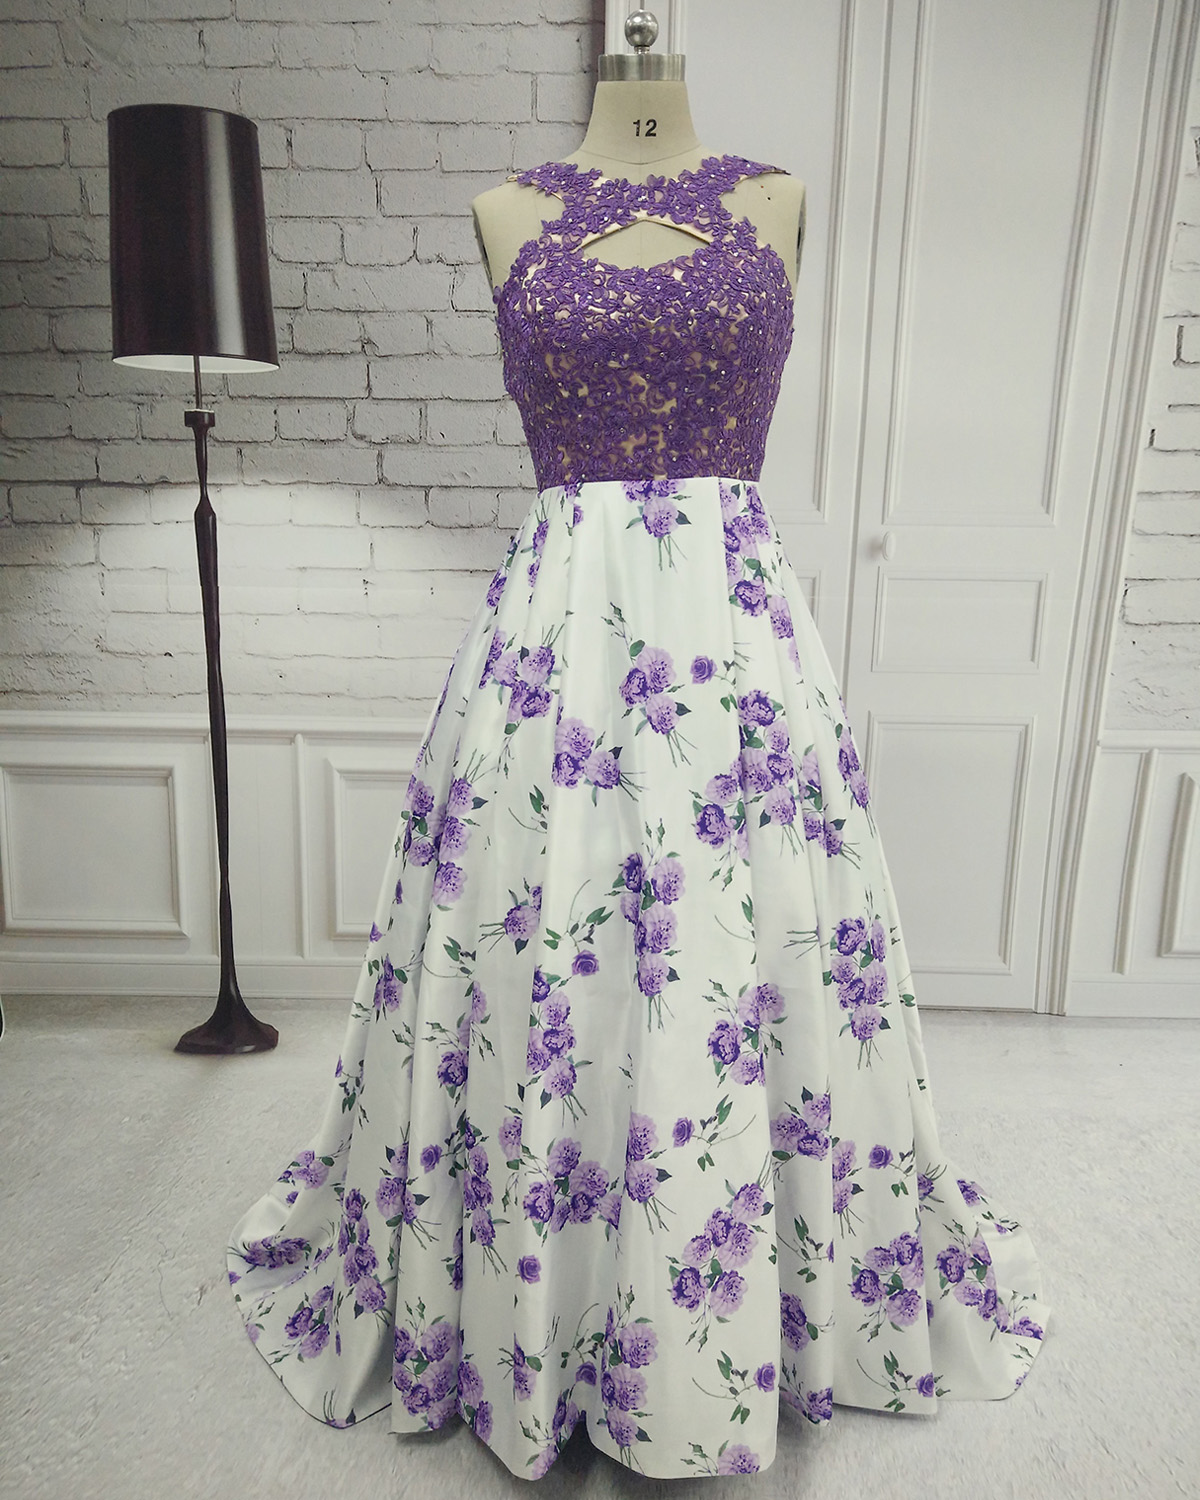 Long Purple A Line Prom Dresses With Lace Applique Bodice And Print Floral Skirt